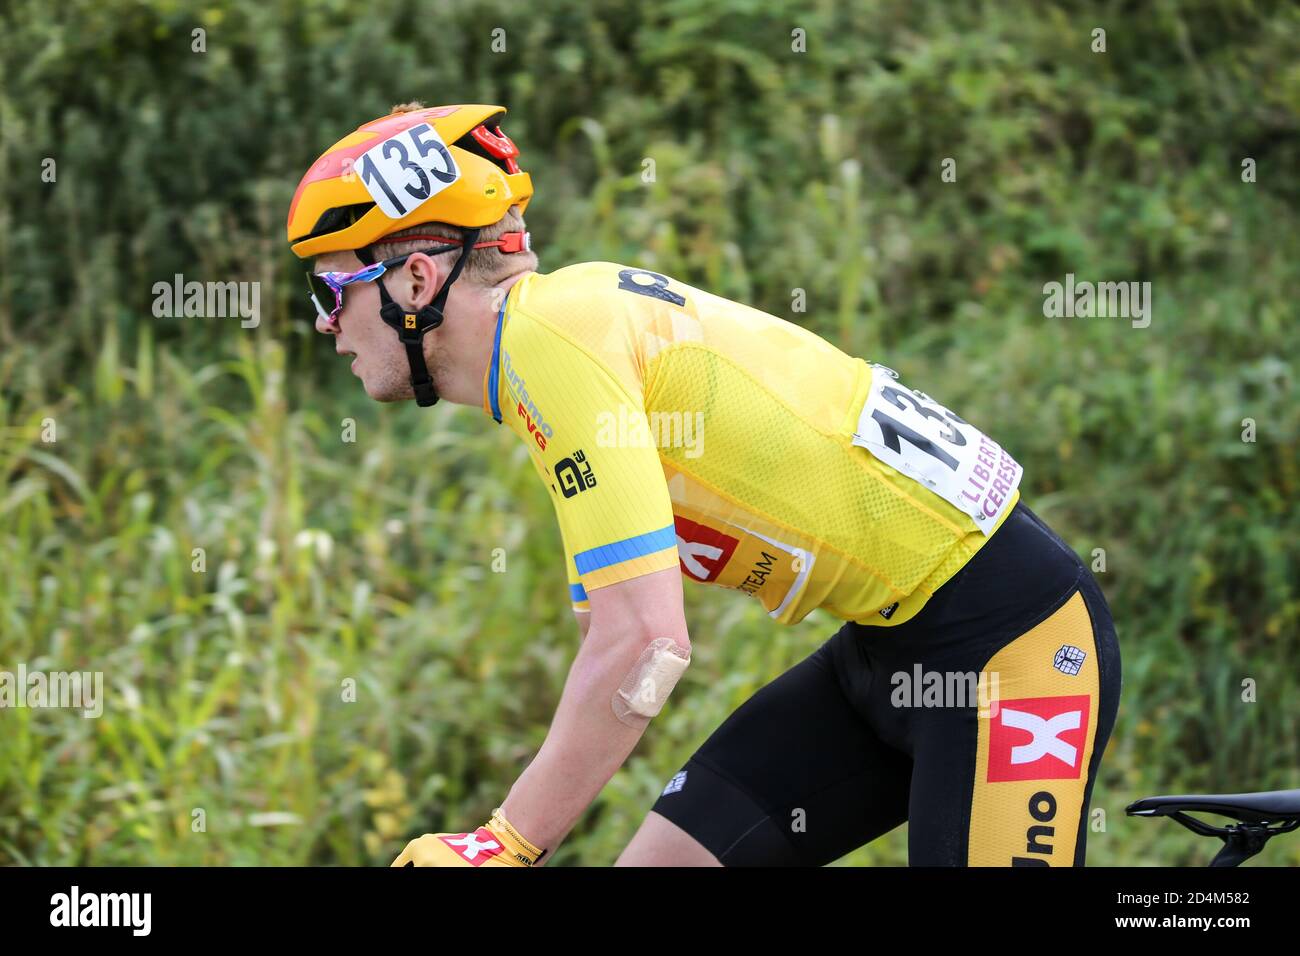 San Marco Di Mereto Di Tomba, Italy. 9th Oct, 2020. san marco di mereto di tomba, Italy, 09 Oct 2020, The leader Niklas Larsen - Uno XPro Cycling Team in yellow jersey during Under 23 Elite - in line race Ã¢â‚¬' Road Race Variano Ã¢â‚¬' San Marco di Mereto di Tomba - Street Cycling - Credit: LM/Luca Tedeschi Credit: Luca Tedeschi/LPS/ZUMA Wire/Alamy Live News Stock Photo